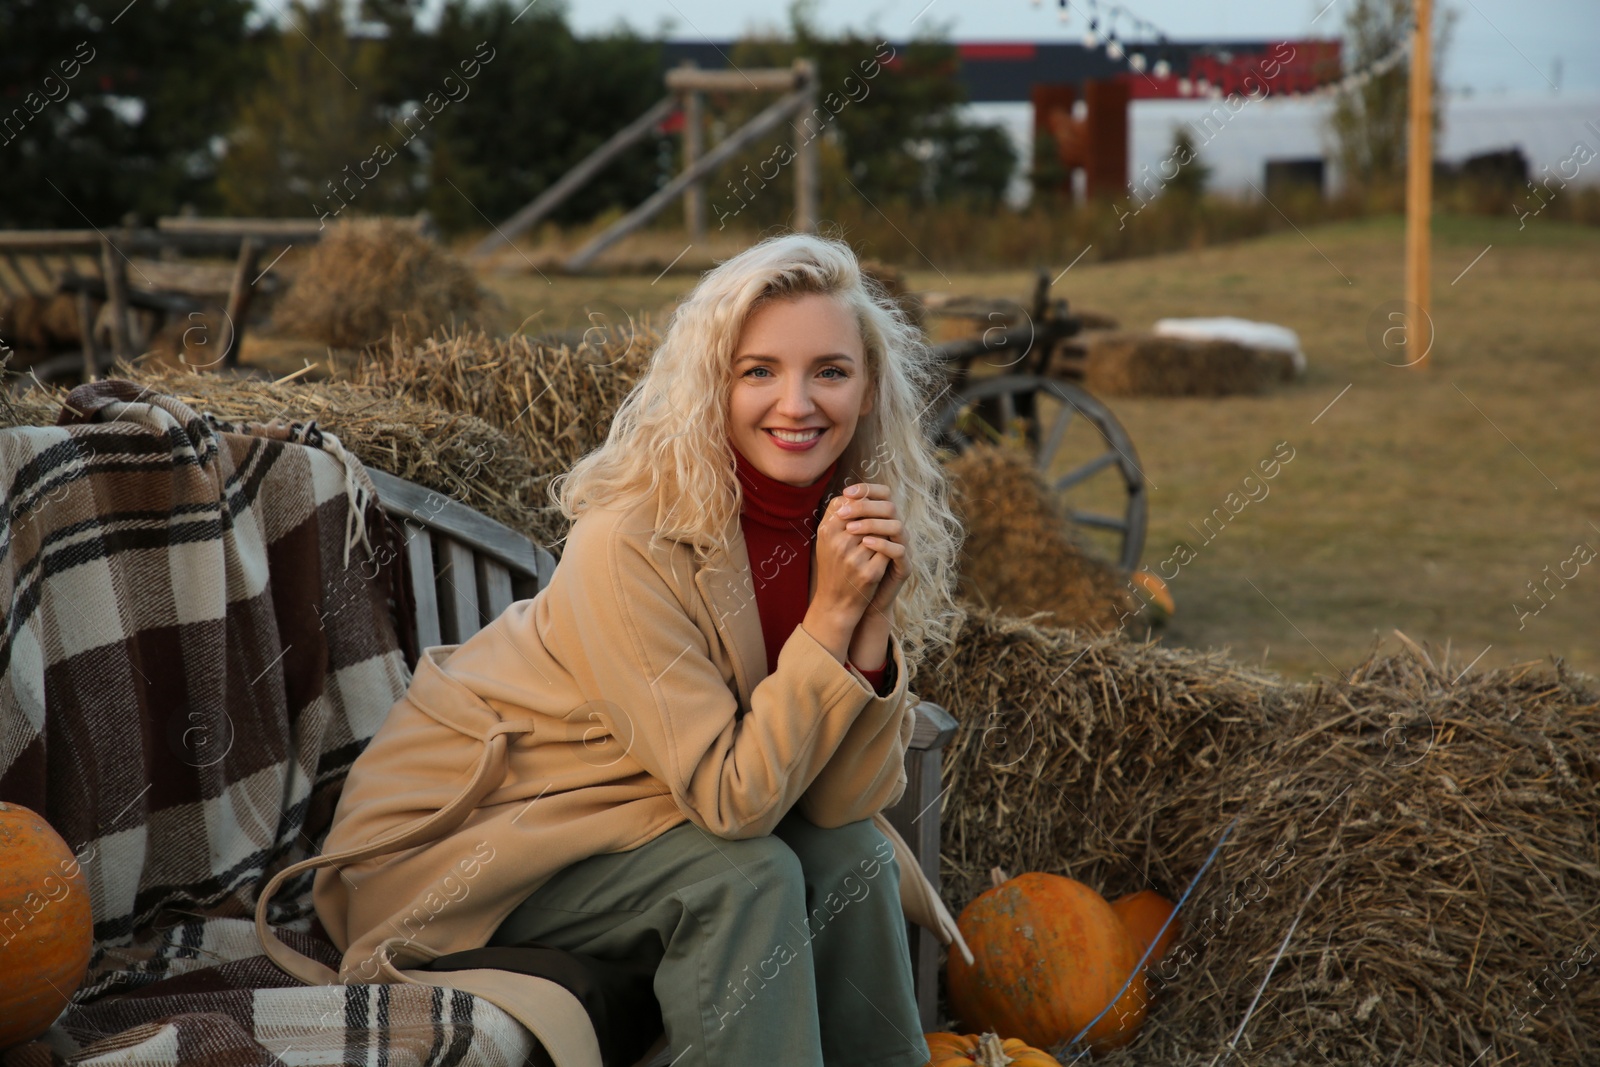 Photo of Beautiful woman sitting on wooden bench near pumpkins and hay bales outdoors. Autumn season